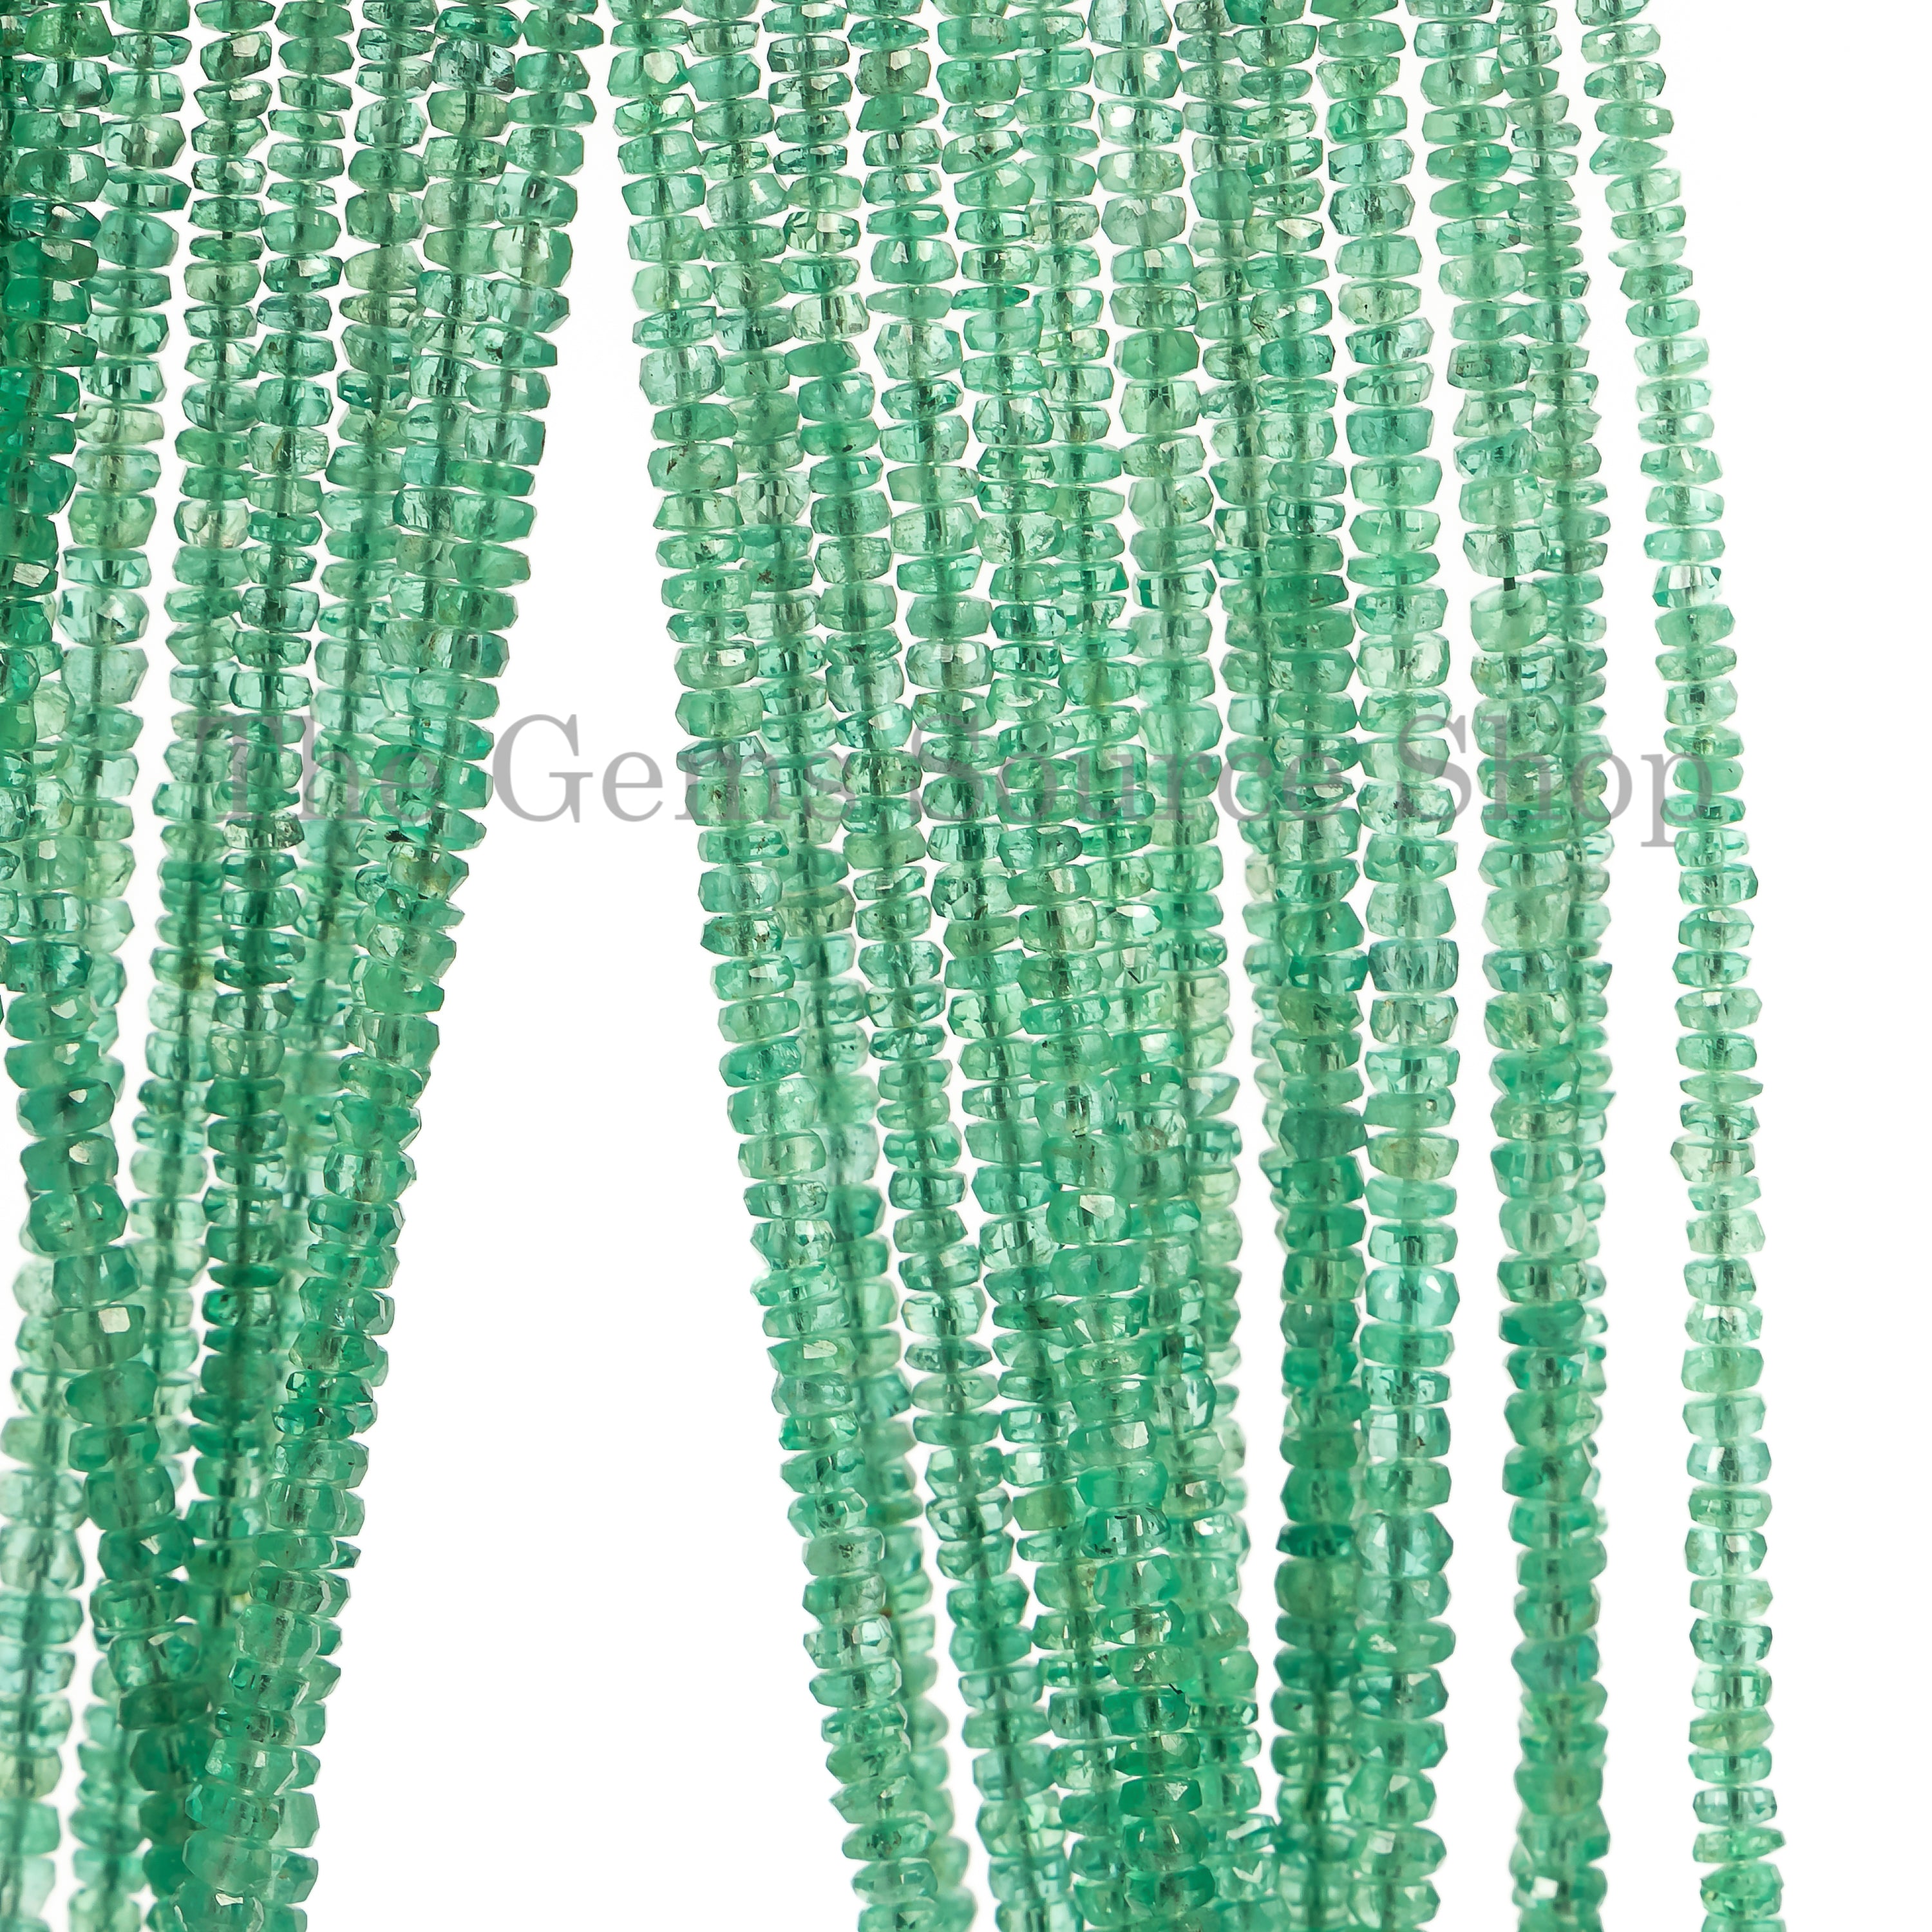 Forest Green Emerald Beads, Emerald Faceted Rondelle Beads, Emerald Gemstone Beads